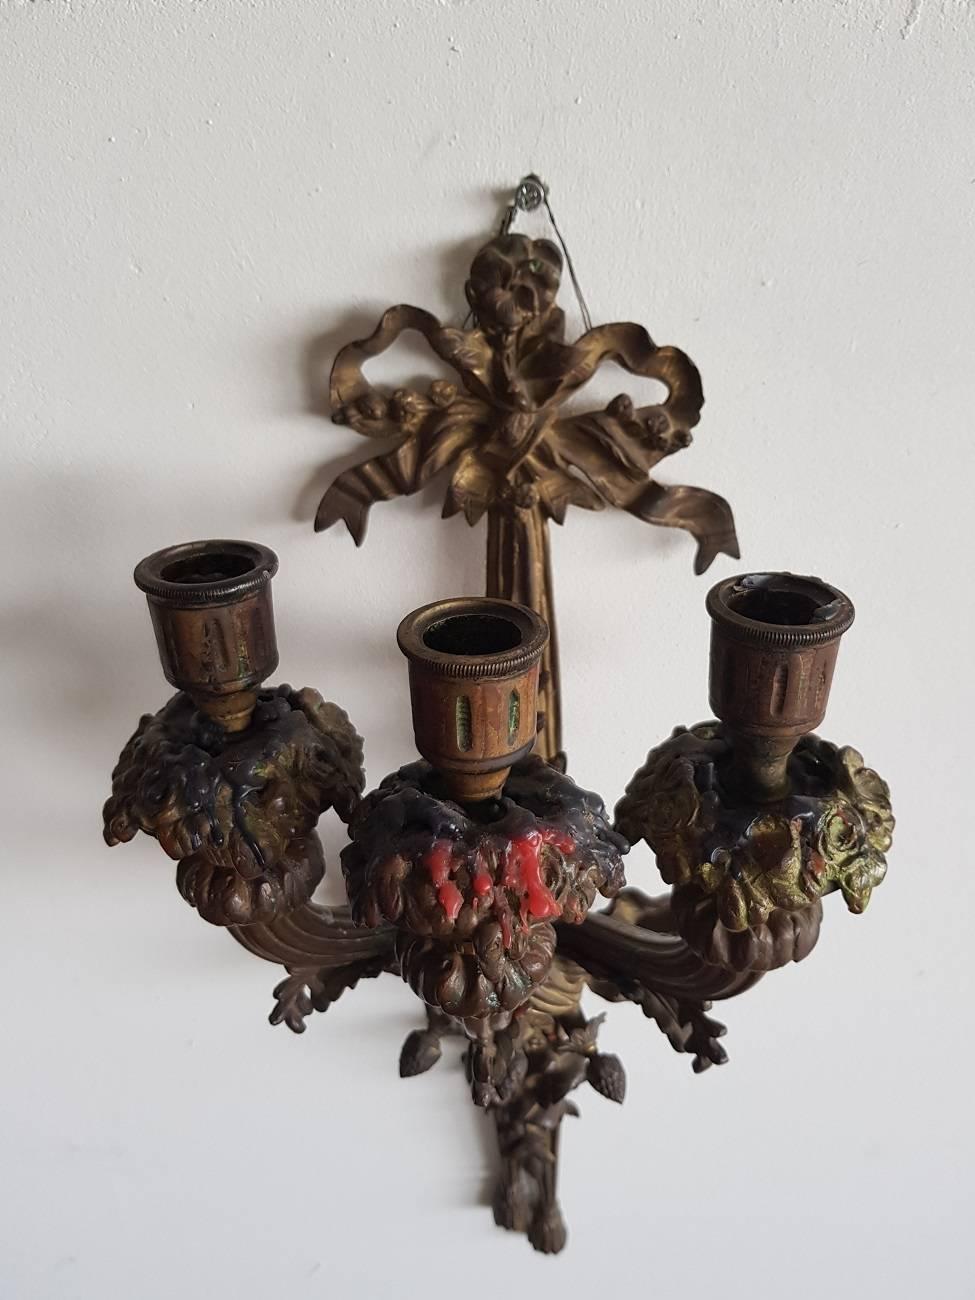 French bronze Louis XVI style wall applique with remains of old gilding from the 19th century. It’s richly decorated with knits, acorns, etc., further in a good but used condition with an old restoration in the back.

The measurements are:
Depth